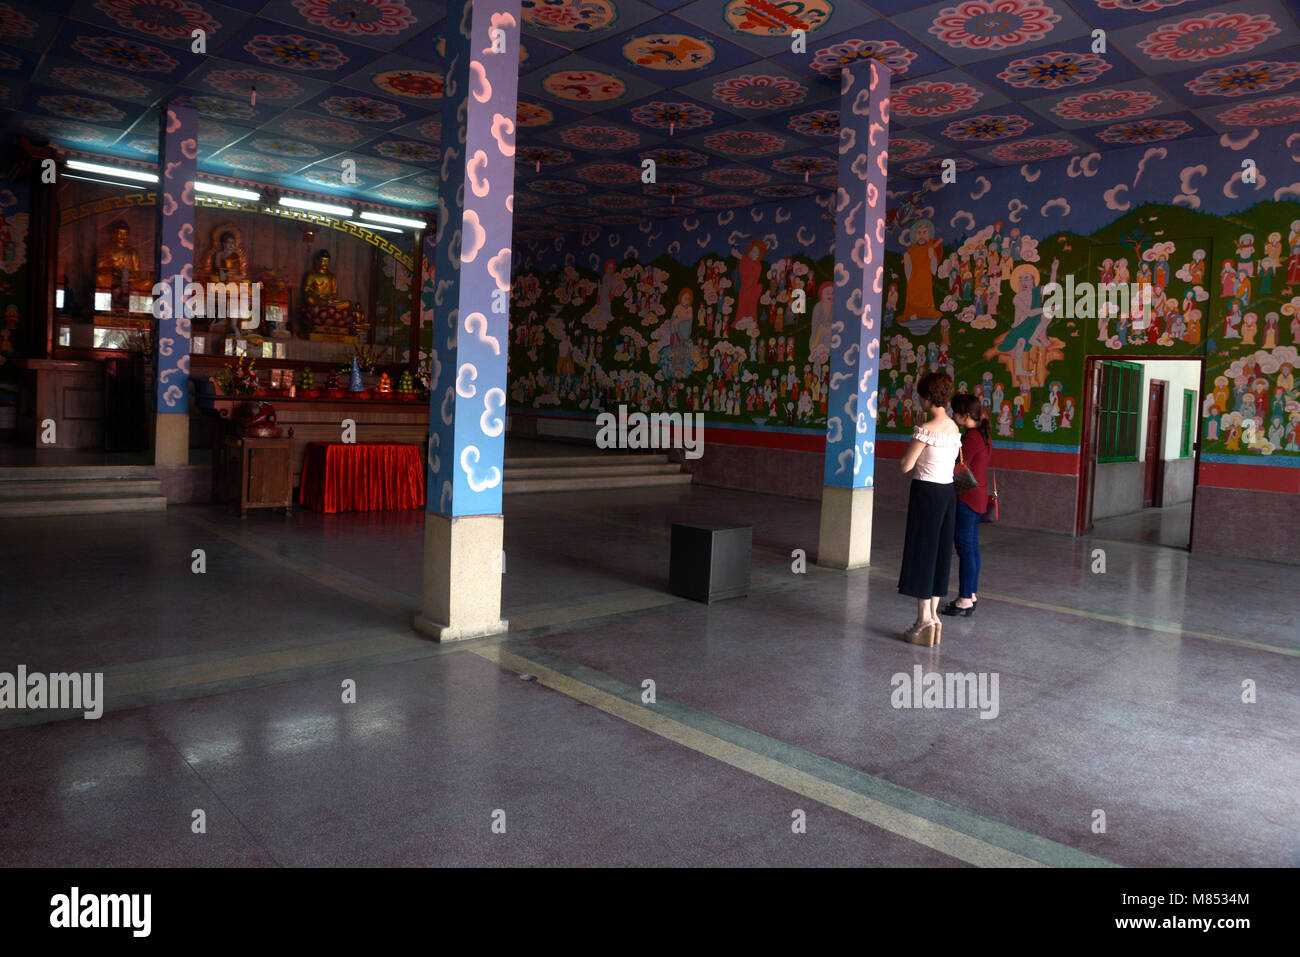 Kolkata, India. 14th Mar, 2018. Chinese women pray to Buddha at Hsuan Tsang monastery during the 50th year celebration. Chinese people celebrates 50th anniversary of Hsuan Tsang monastery the only Chinese Buddhist temple in Kolkata. The Hsuan Tsang monastery built in 1968 and named after the famous Chinese Buddhist monk and traveler Hsuan Tsang who came to India about 1400 years ago. Credit: Saikat Paul/Pacific Press/Alamy Live News Stock Photo